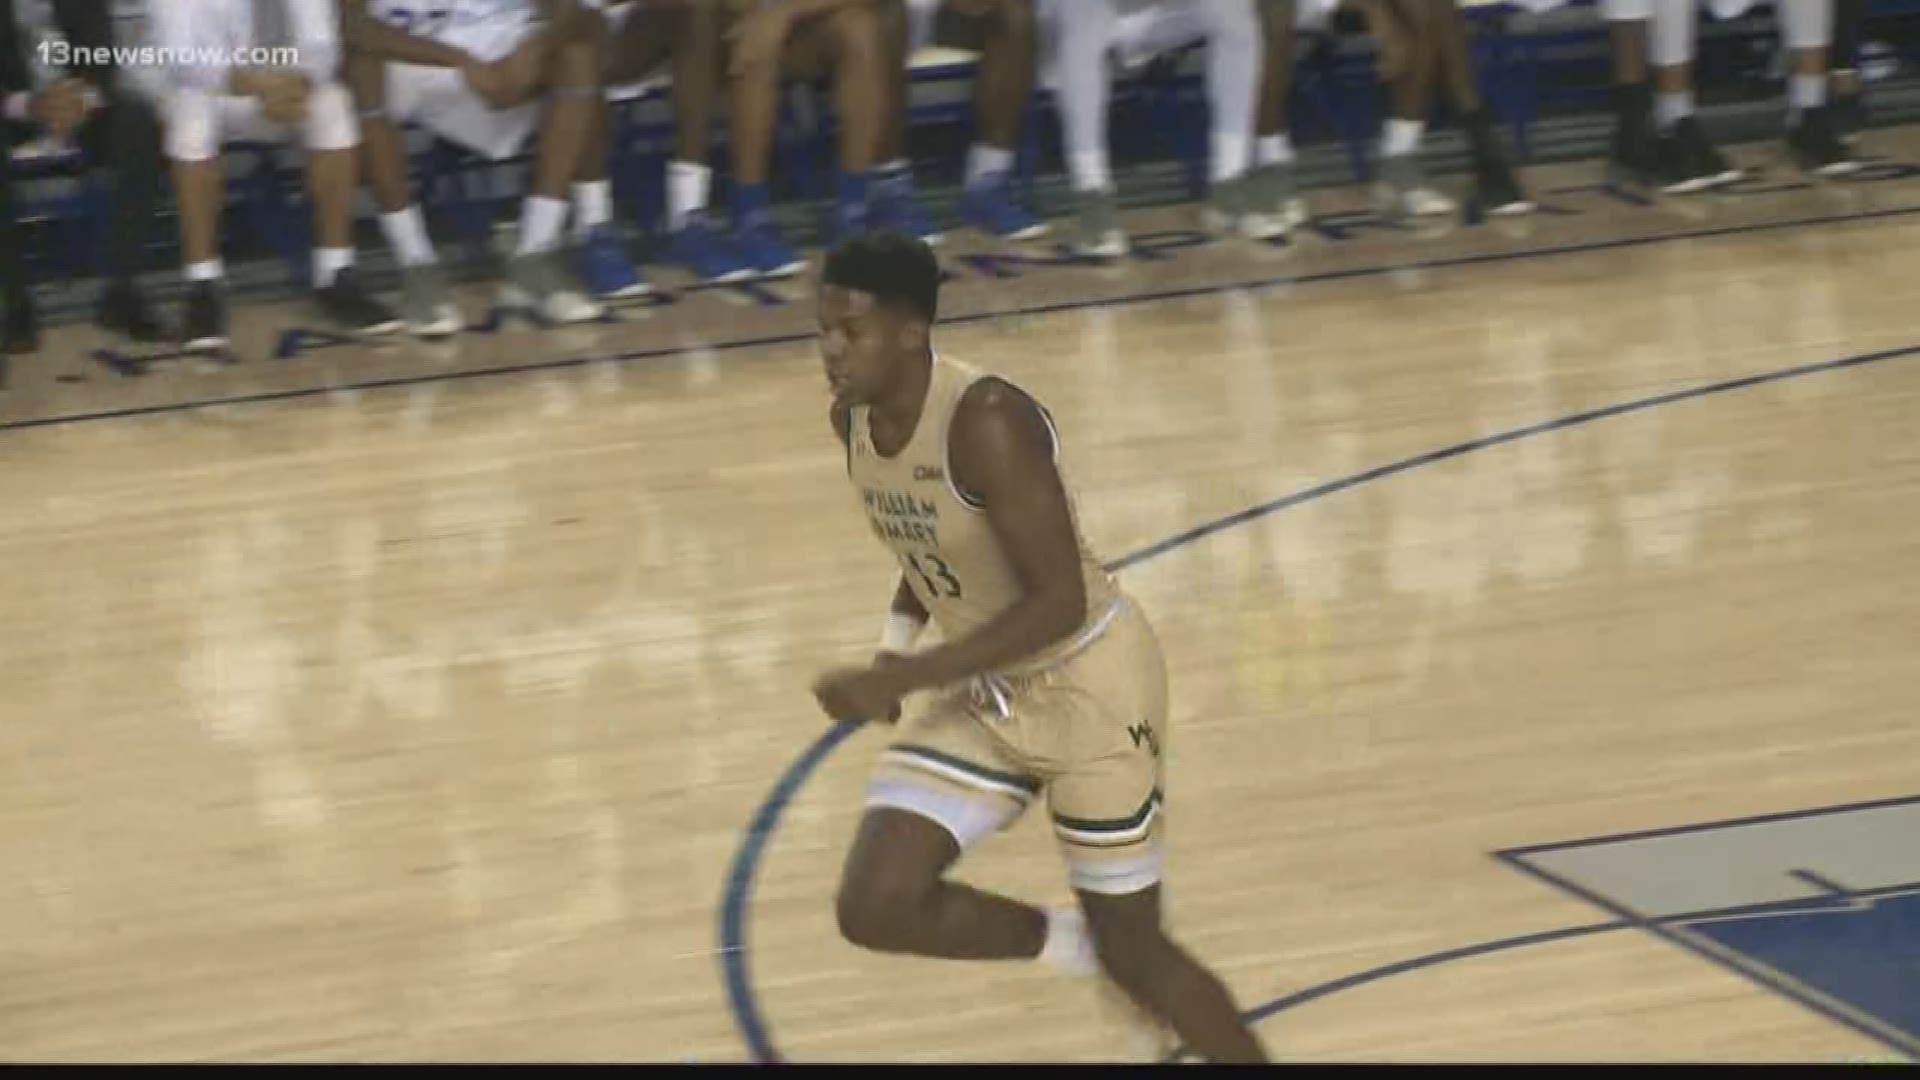 Despite a game high 31 points from Hampton's, Jermaine Marrow, the College of William & Mary had just enough to win over the Pirates 76-71. Nathan Knight topped the Tribe with 24 points to go with 12 rebounds.